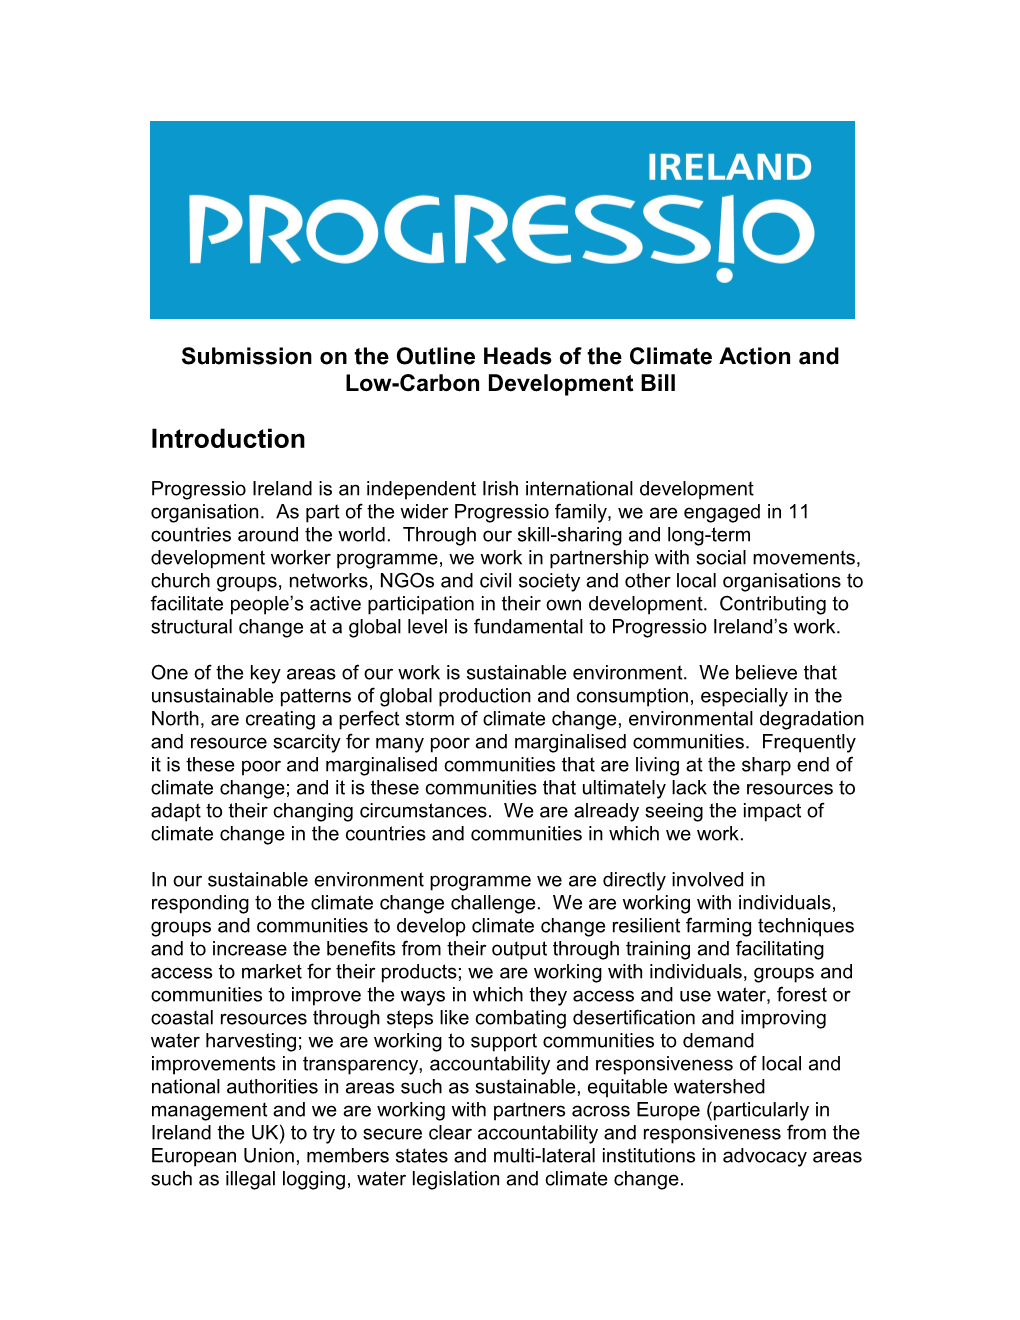 Submission on the Outline Heads of the Climate Action and Low-Carbon Development Bill